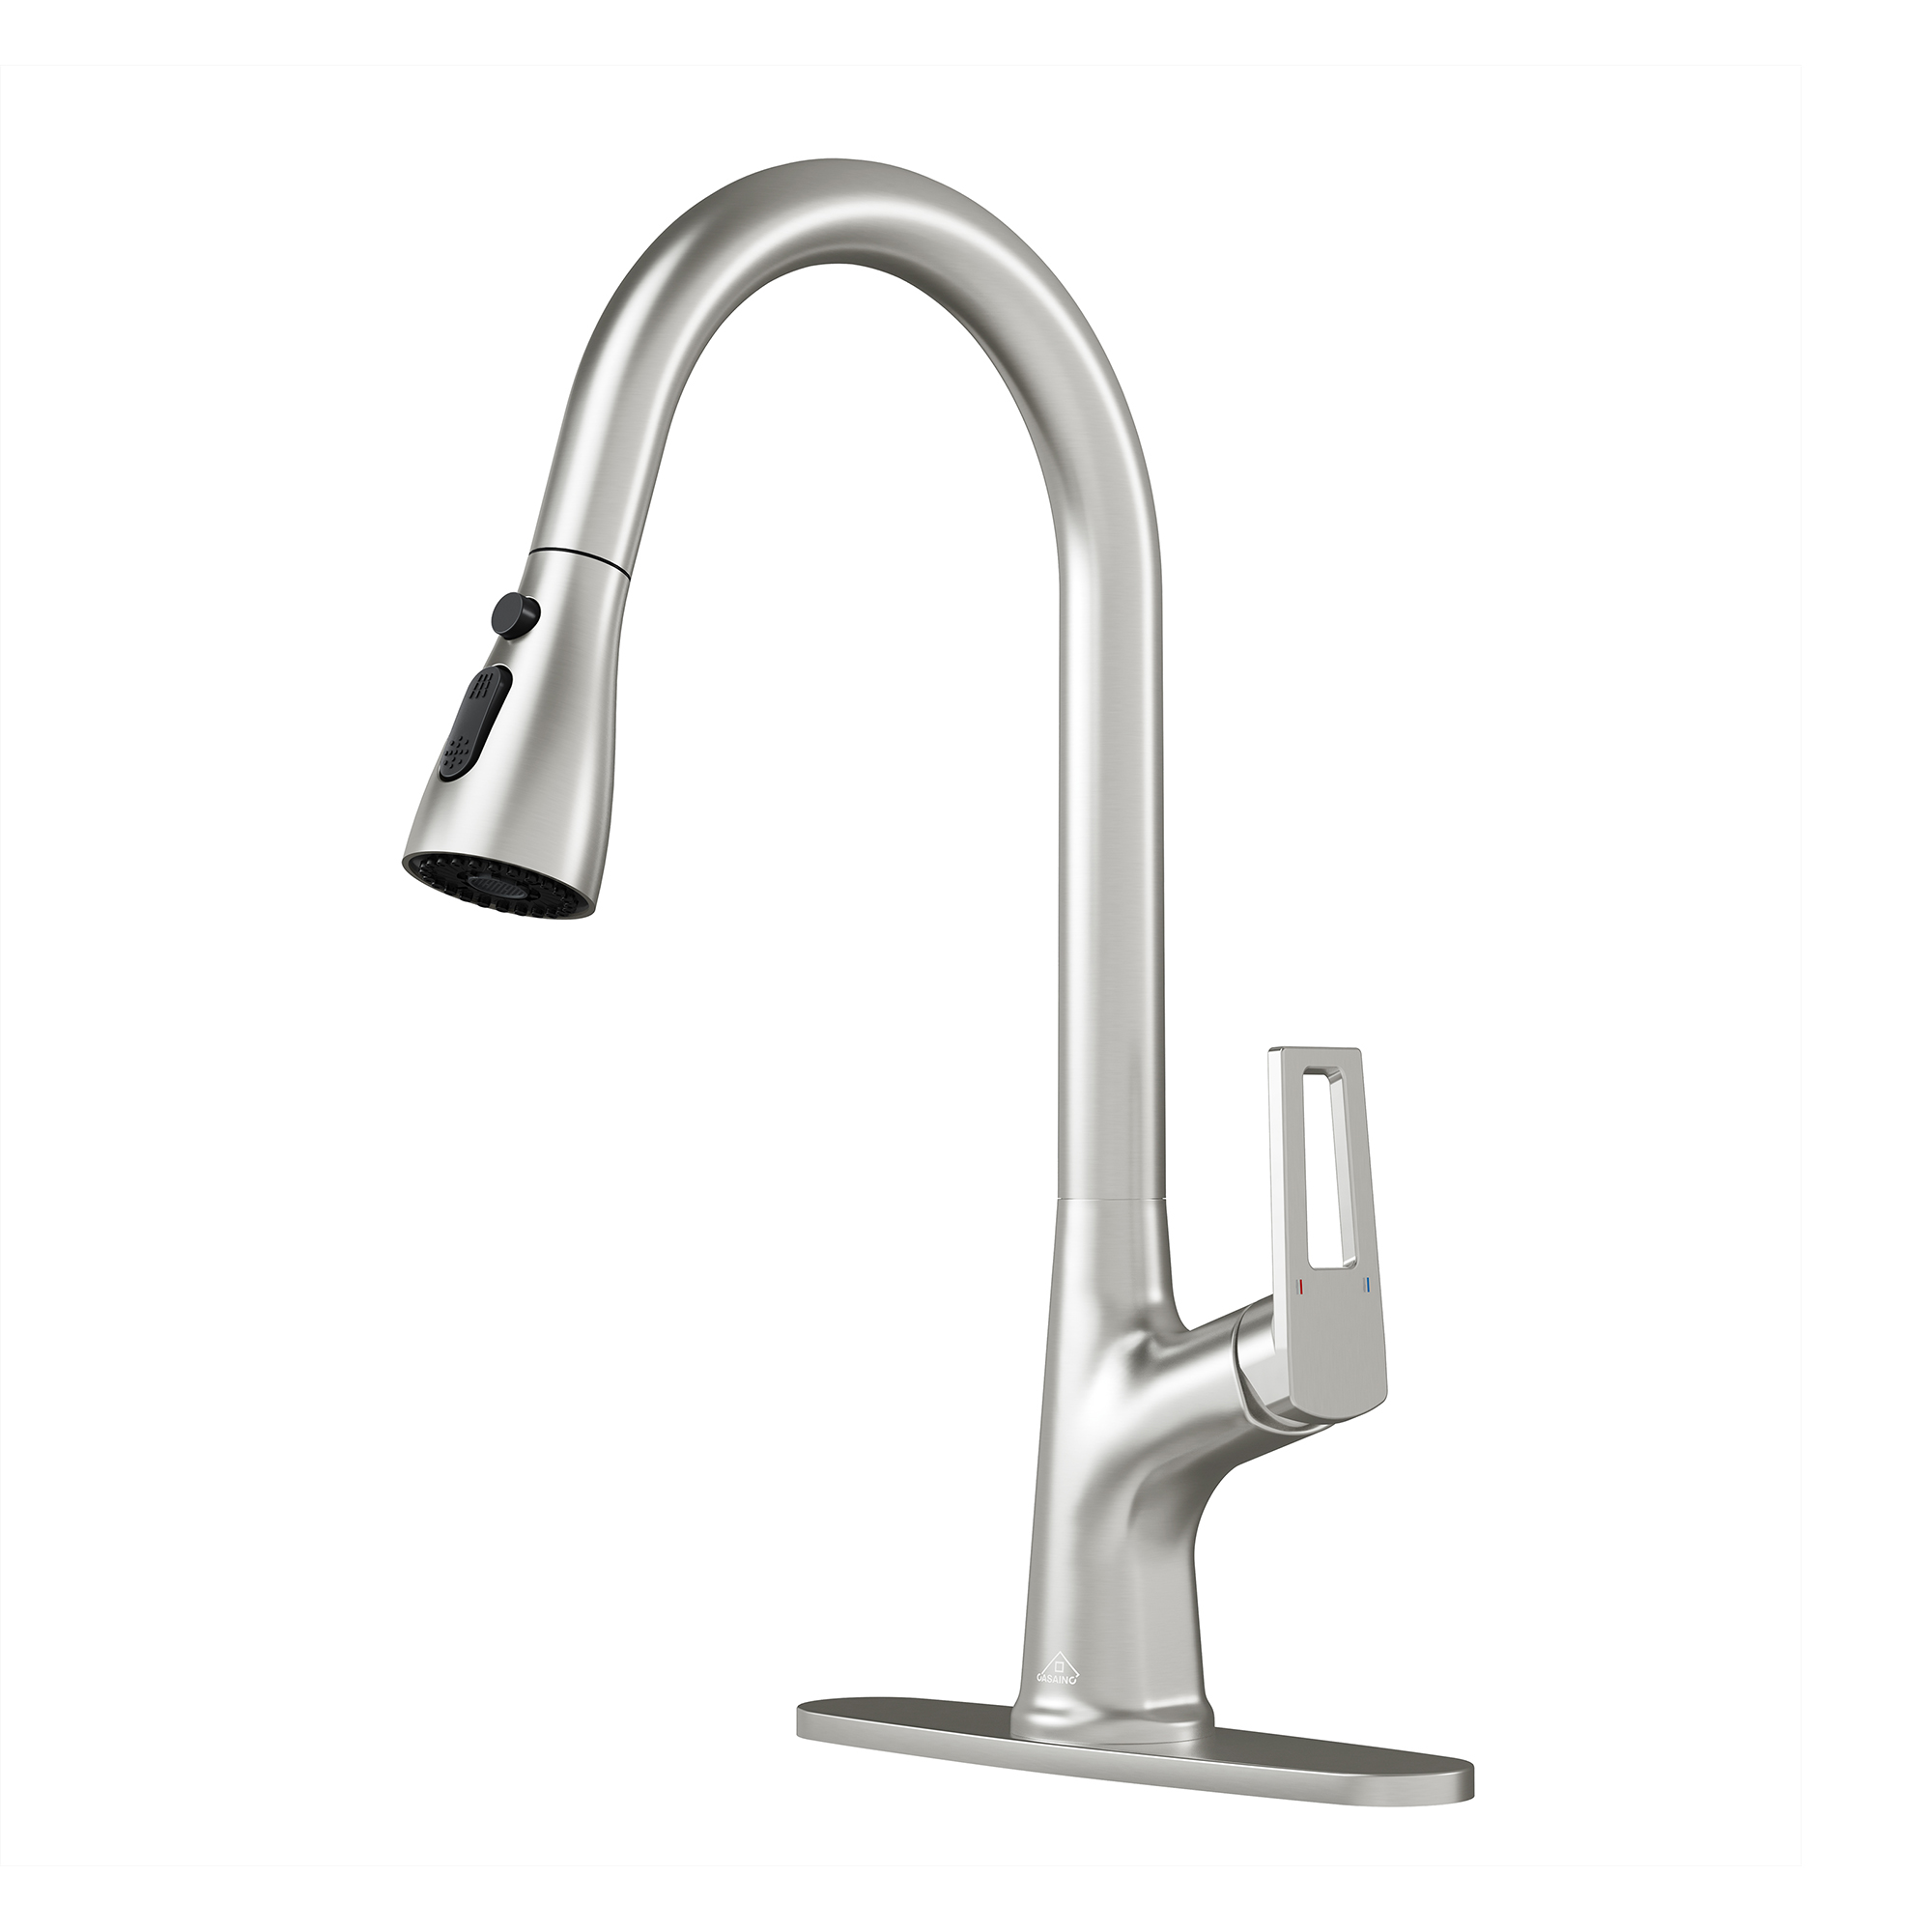 CASAINC Single-Handle Pull-Out Kitchen Faucet in Brushed Nickel/Matte Black/Matte White/Brushed Gold